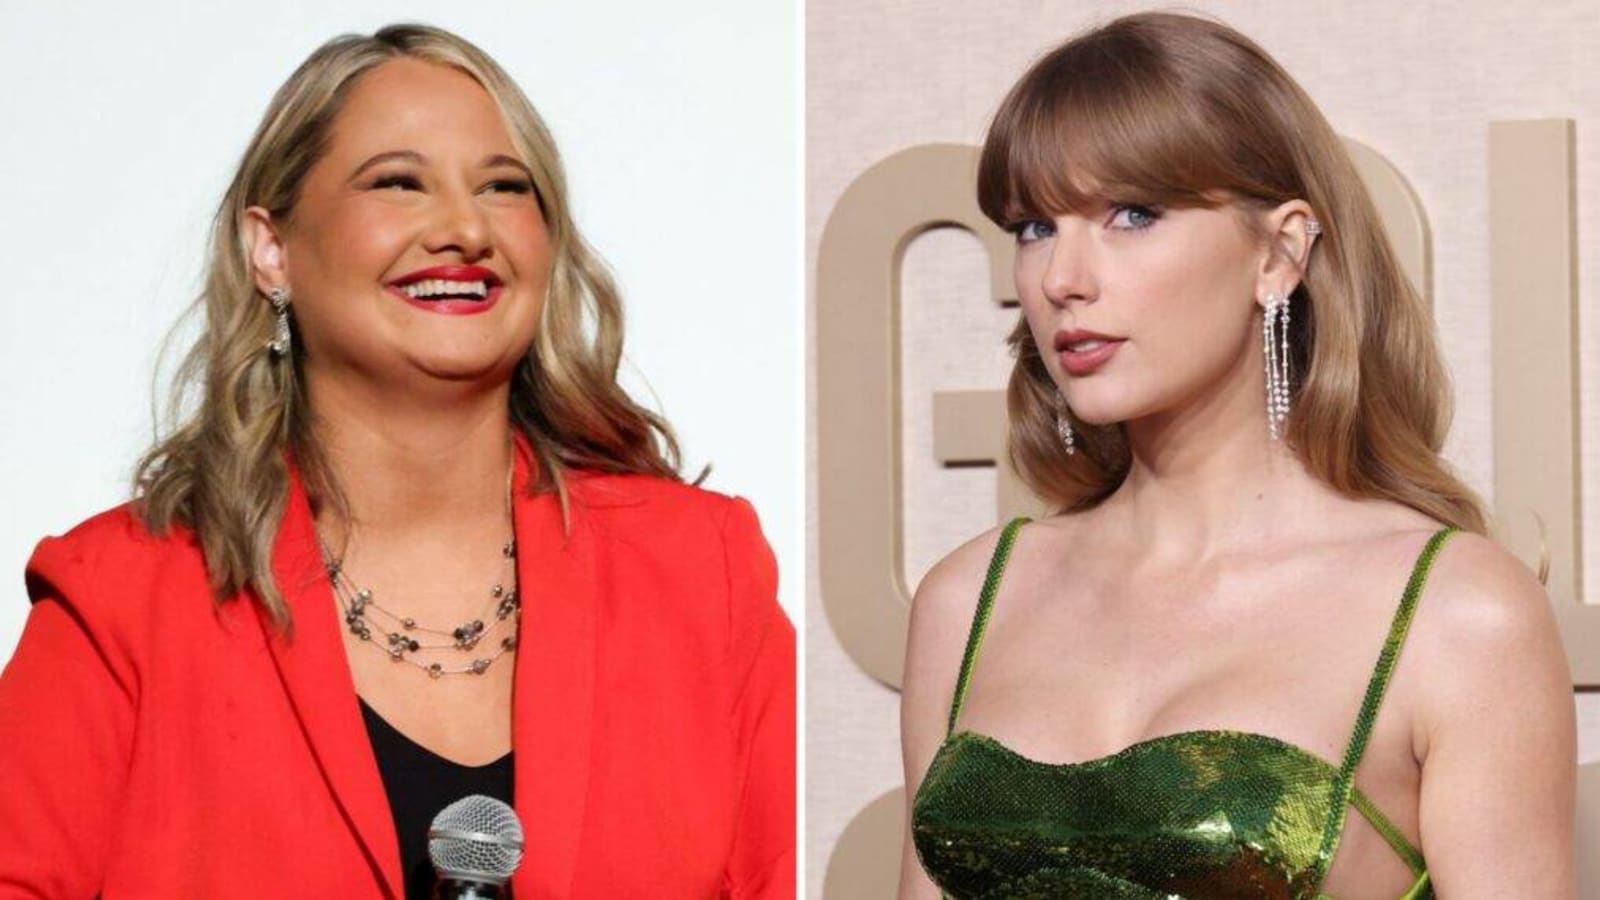 Gypsy Rose Blanchard Thinks New Taylor Swift Song is About Her